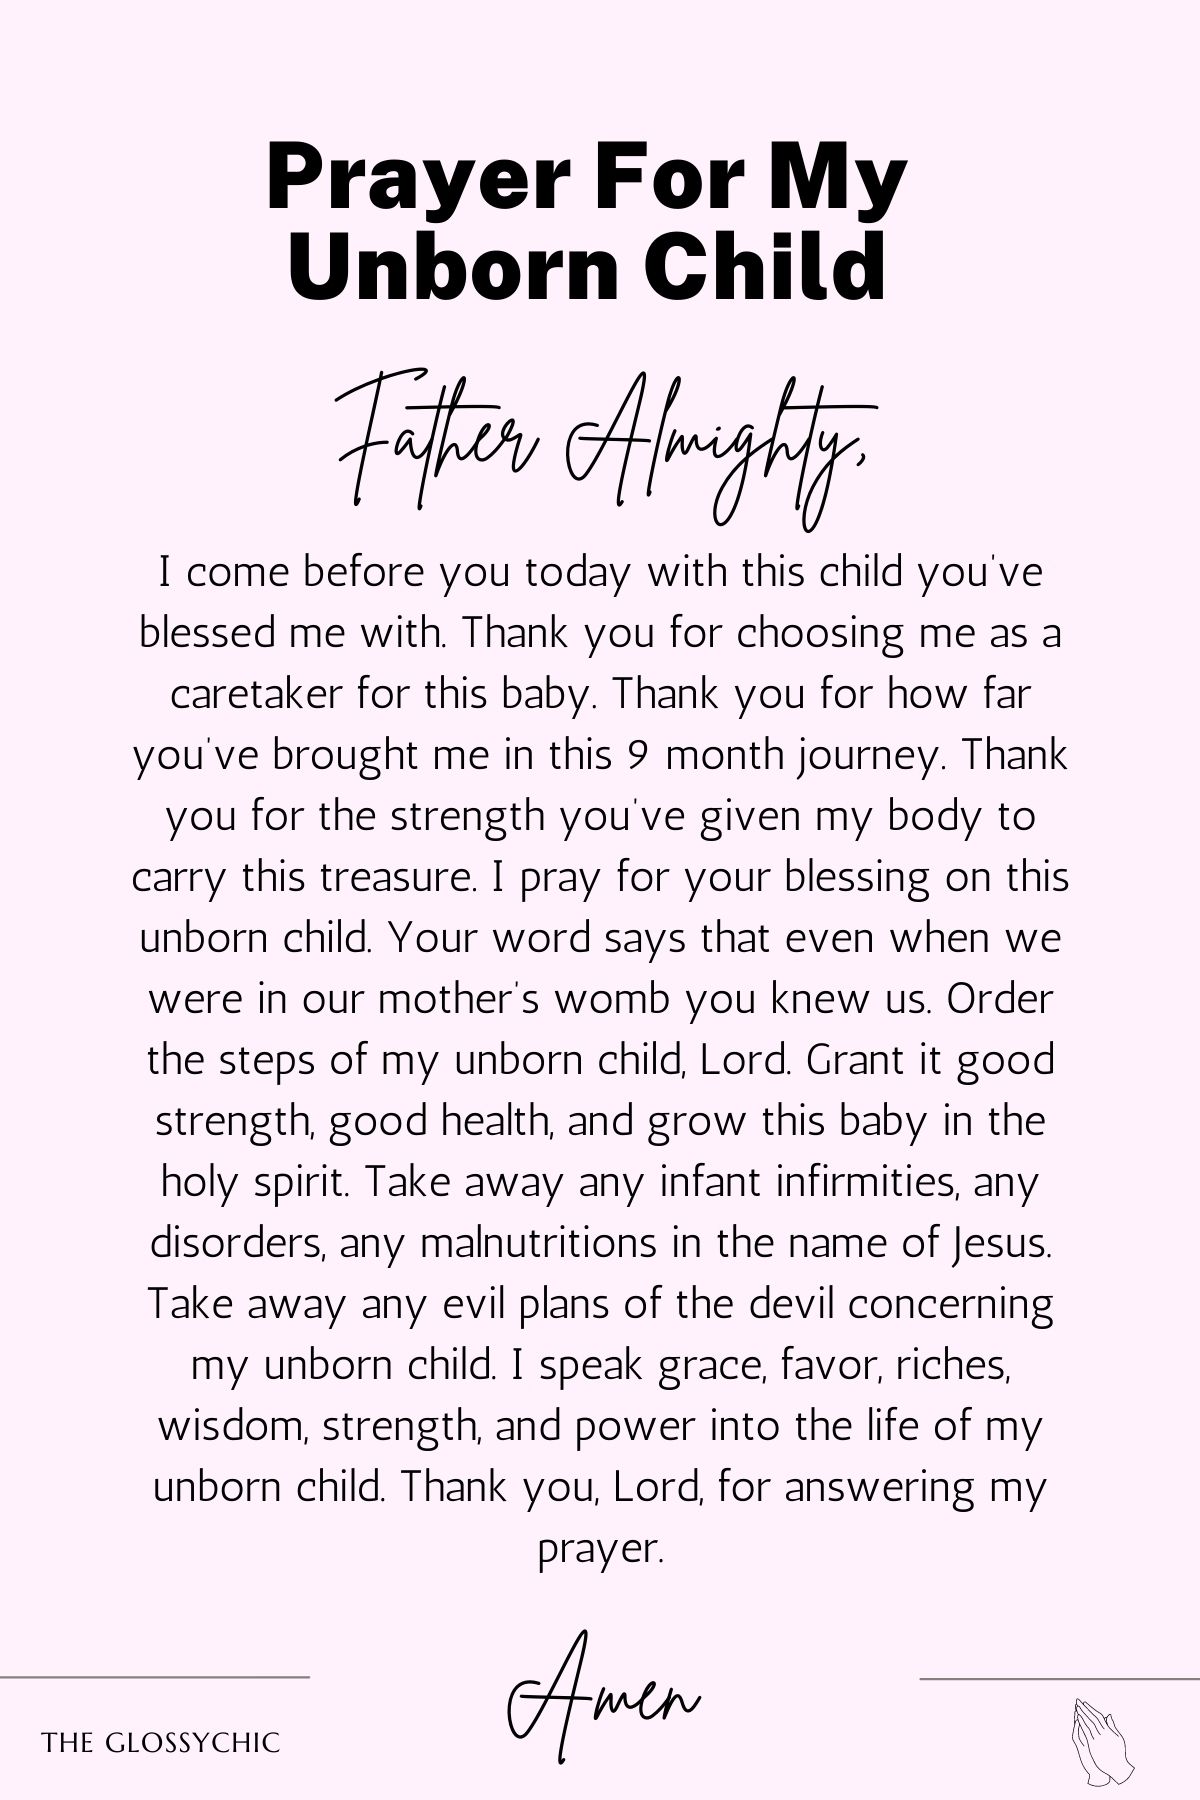 Prayer for your unborn child